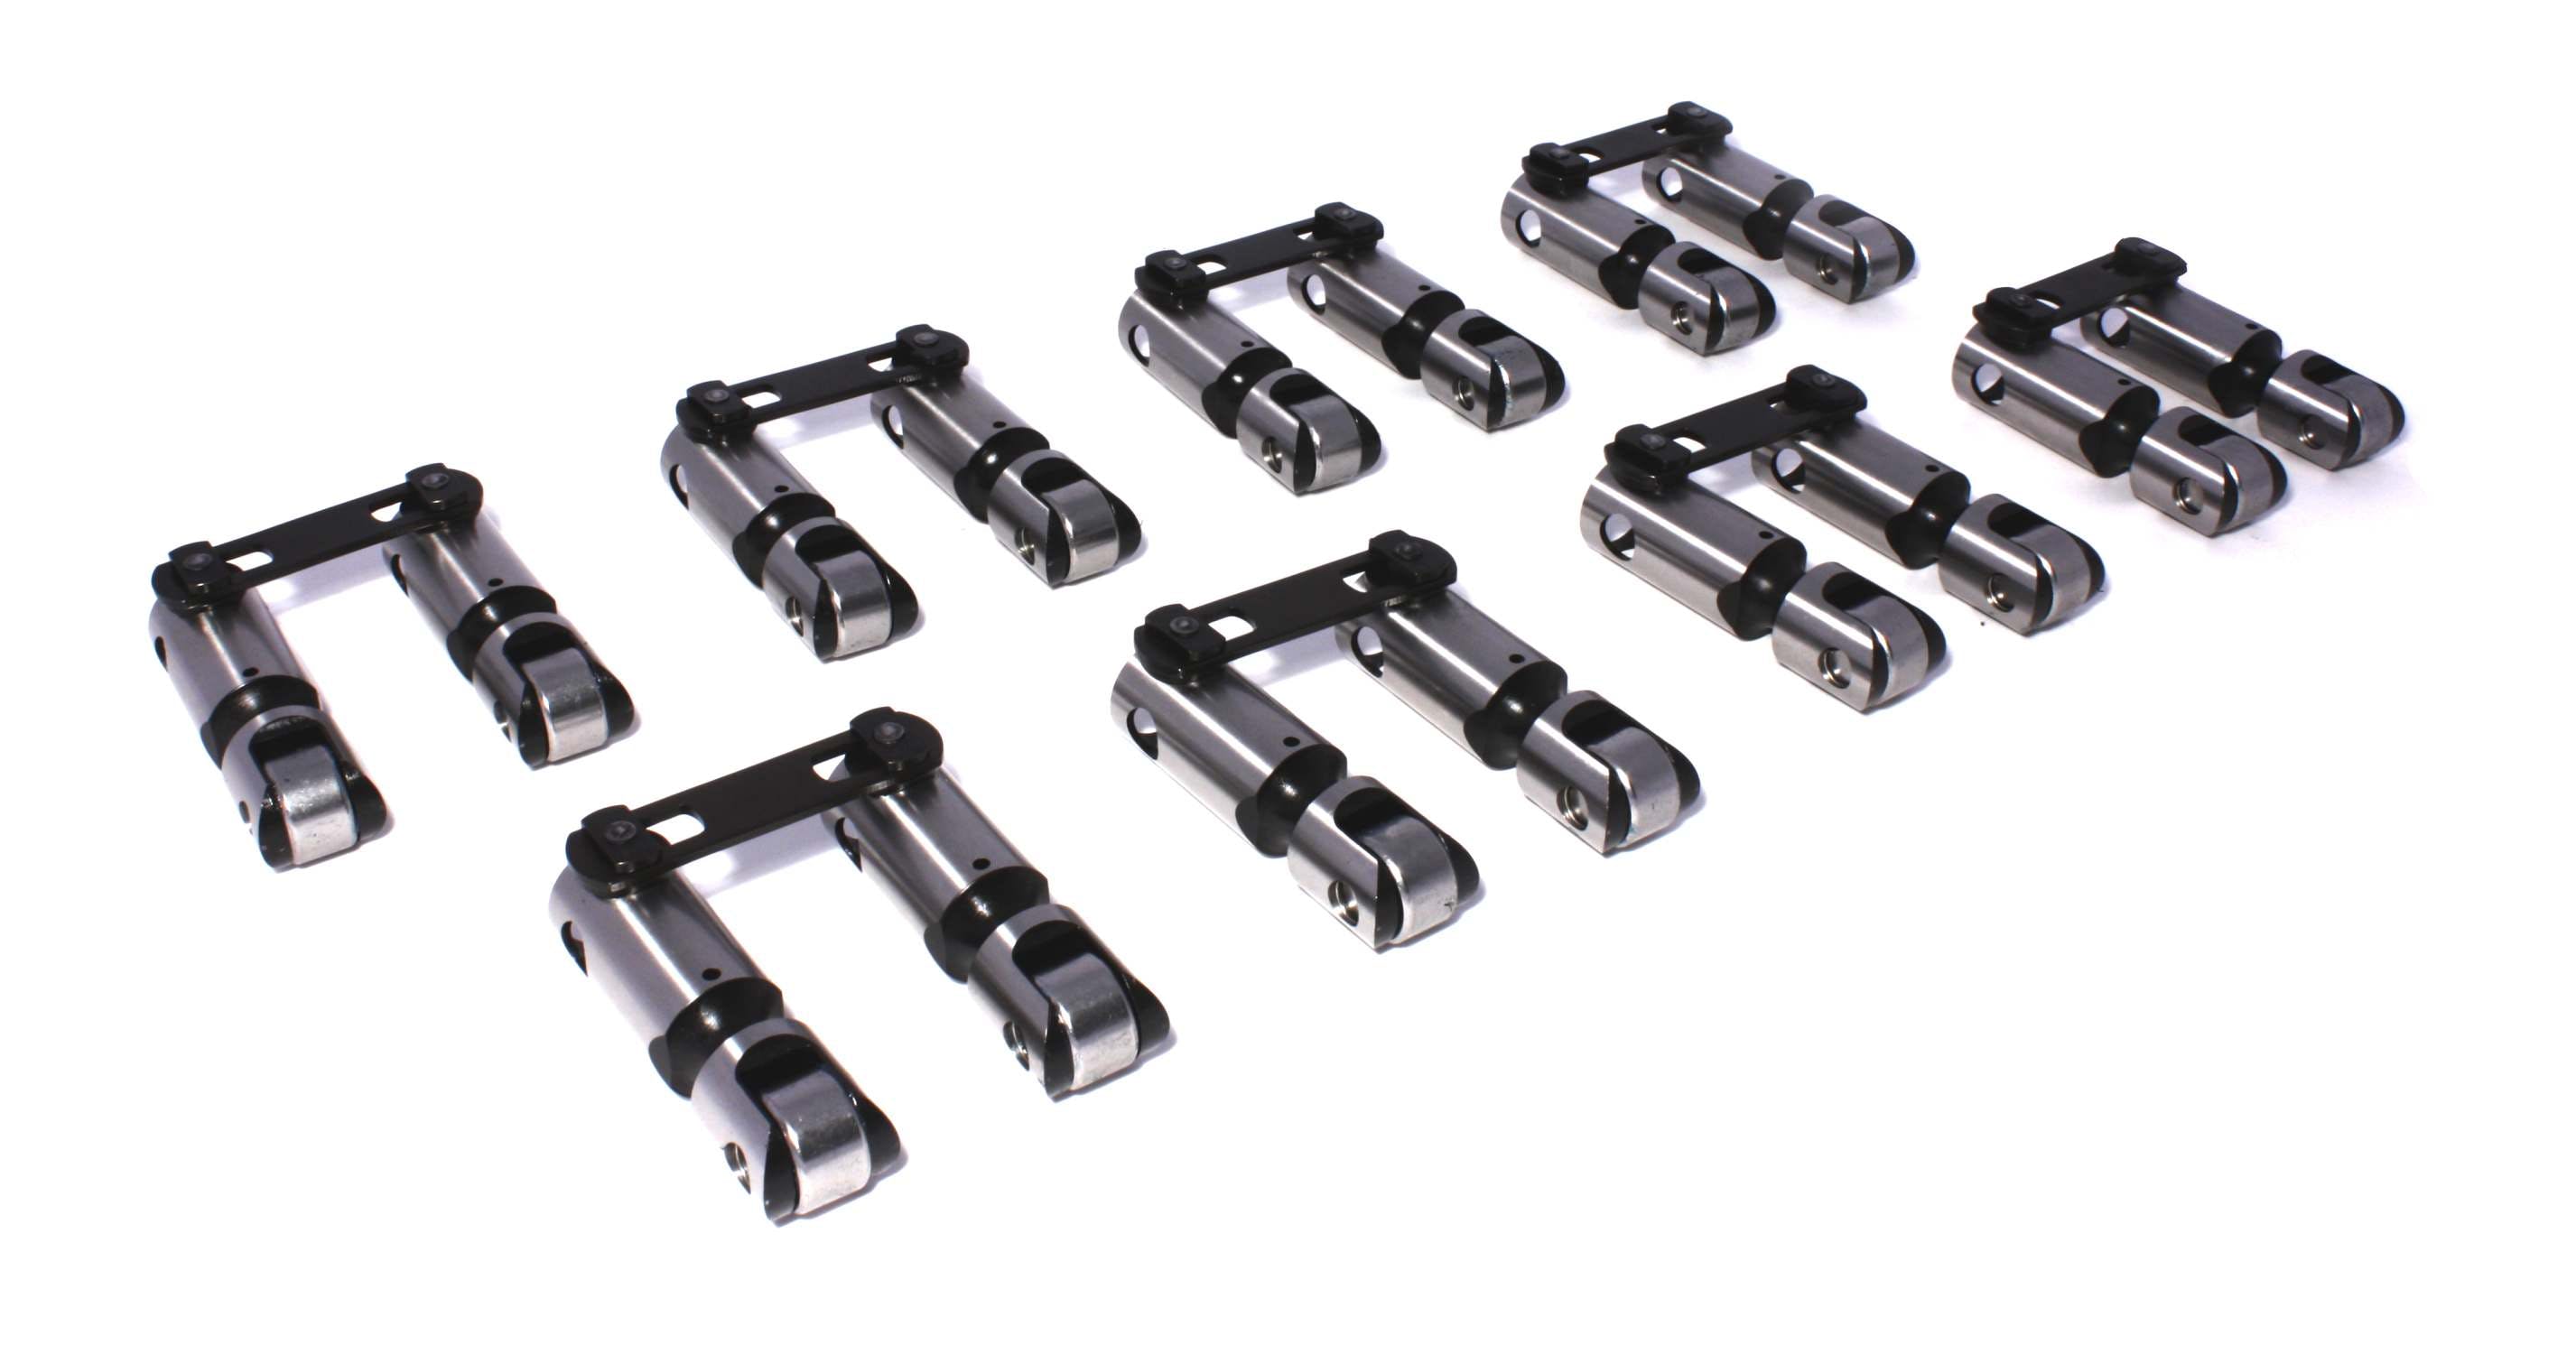 Competition Cams 838-16 Endure-X Roller Lifter Set